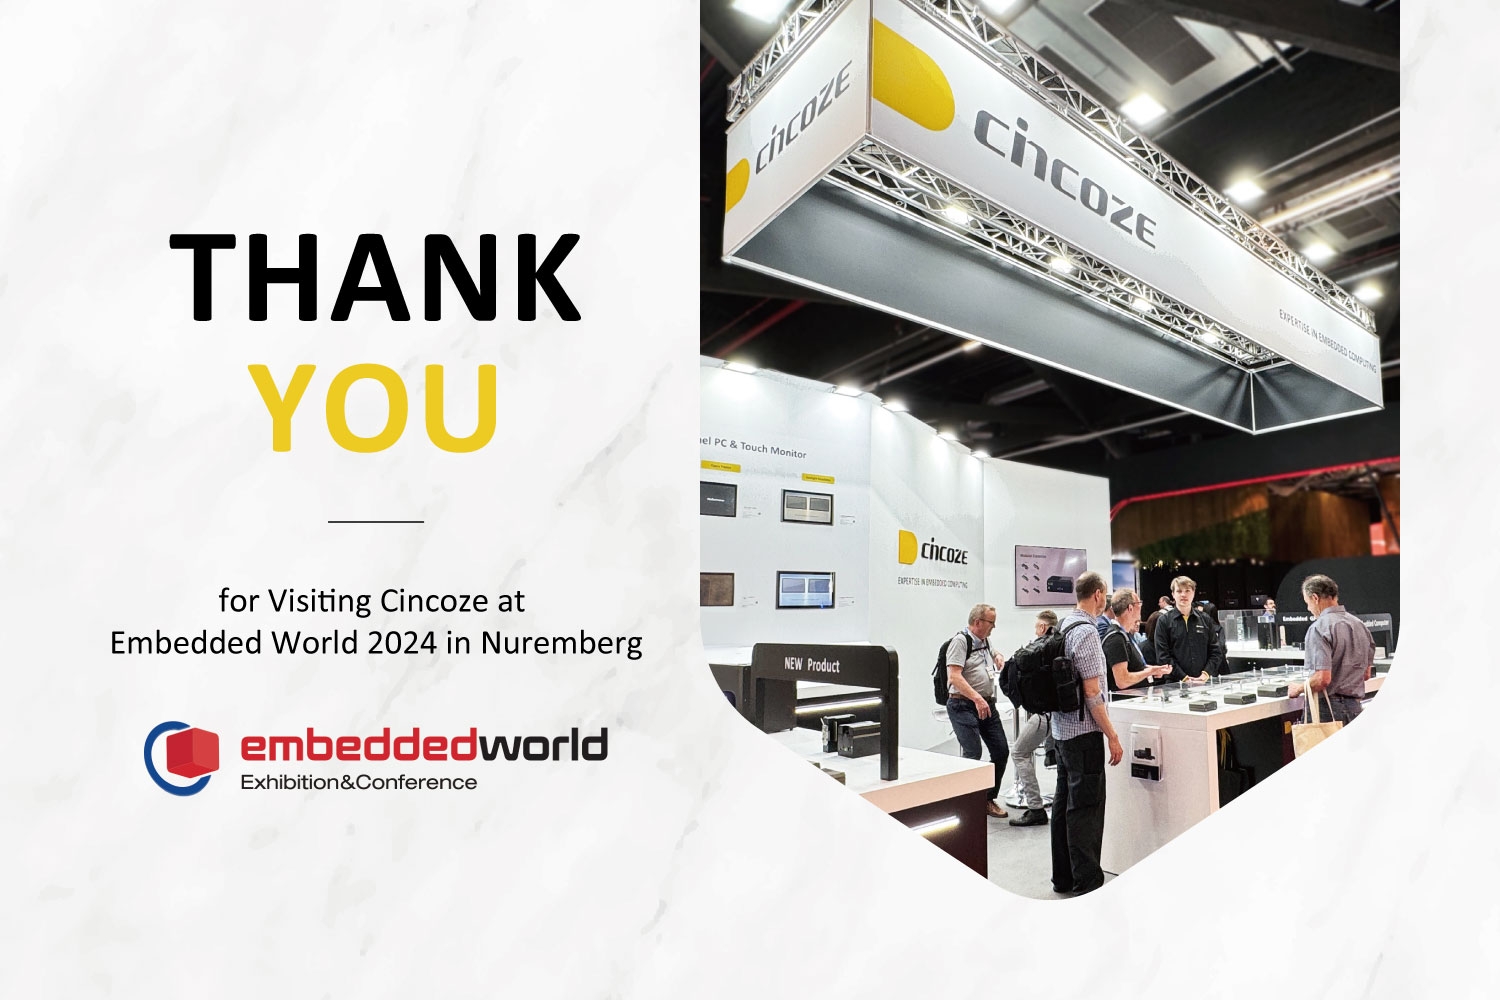 Thank You for Visiting Cincoze at Embedded World 2024 in Nuremberg